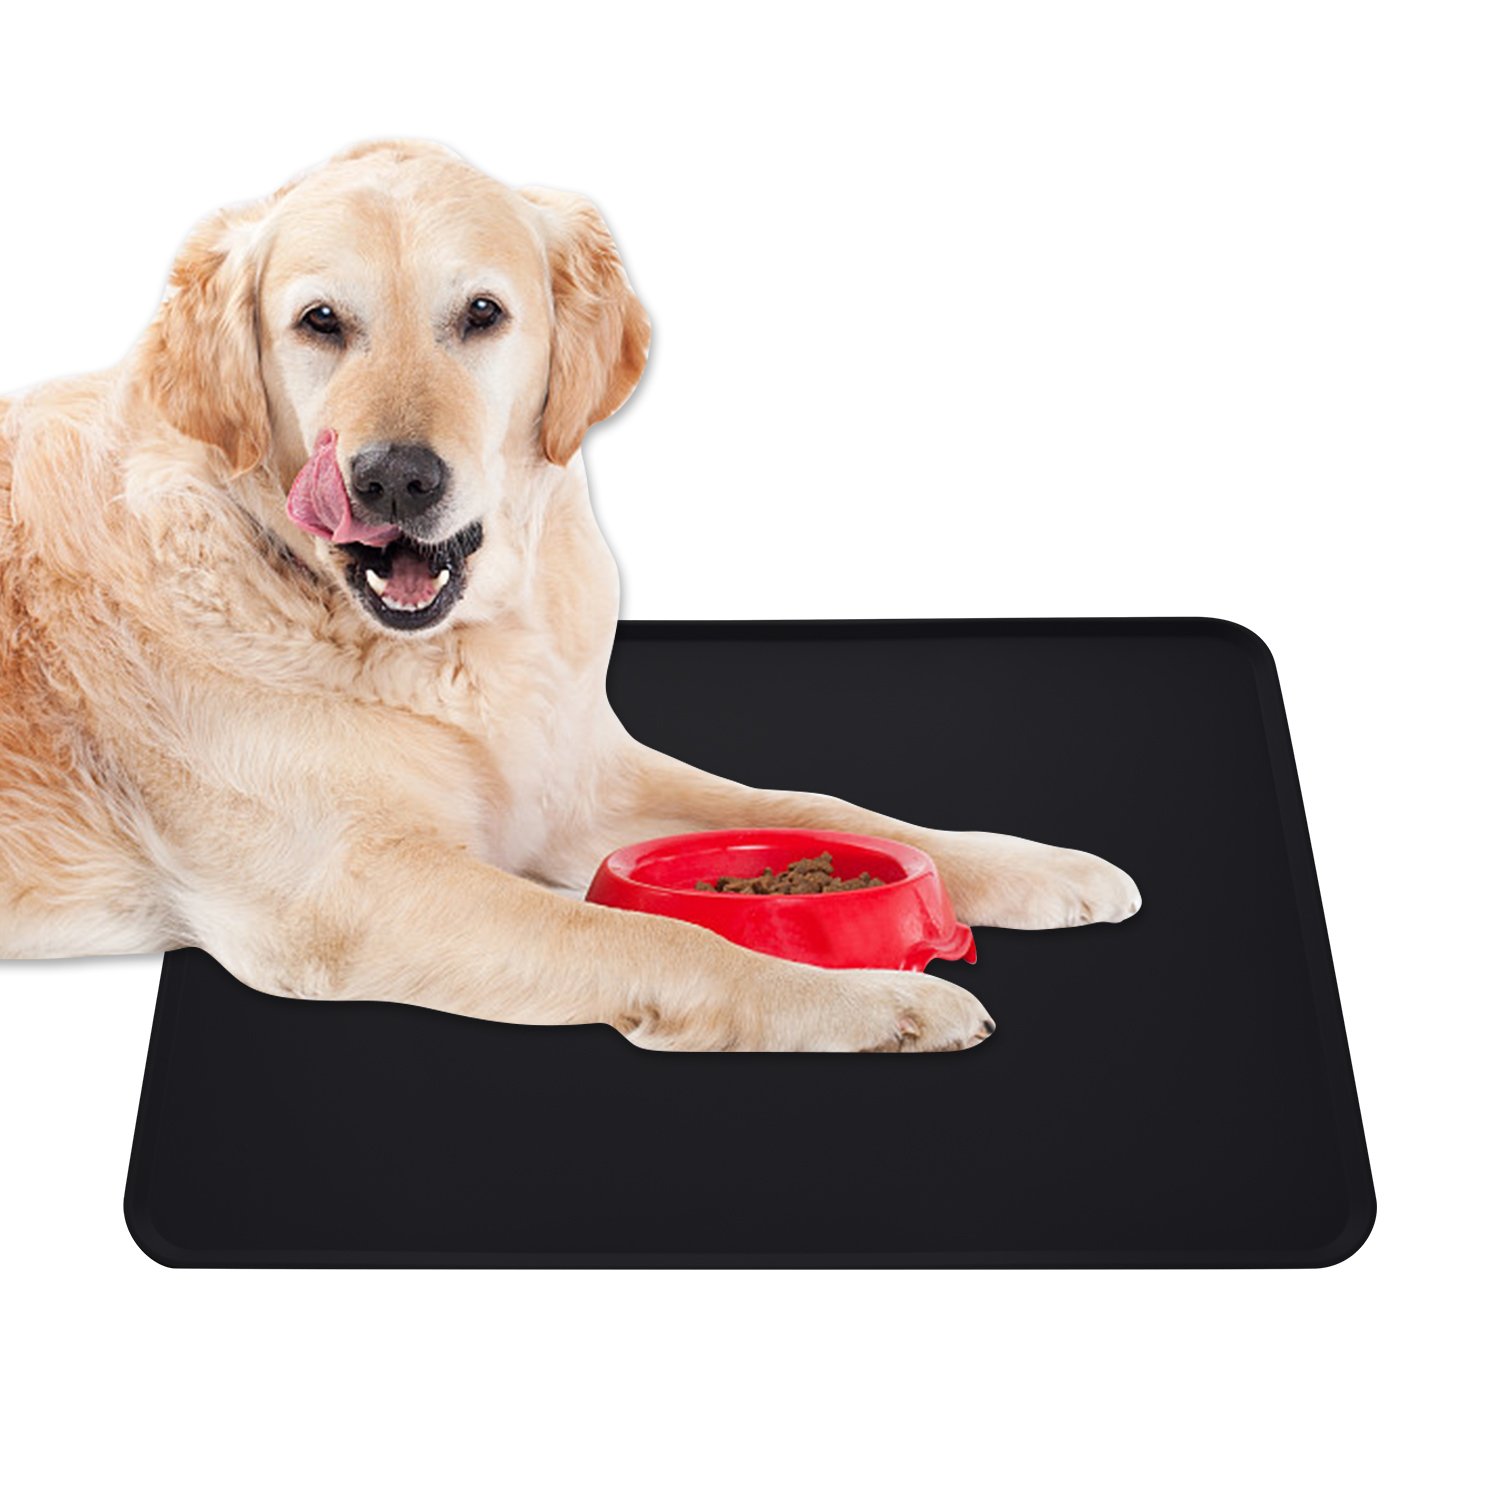 Dog Food Mat, Silicone Dog Cat Bowl Mat, Non Slip Waterproof Pet Feeding Mat FDA Grade Food Container Placemat for Small Animals - image 5 of 6